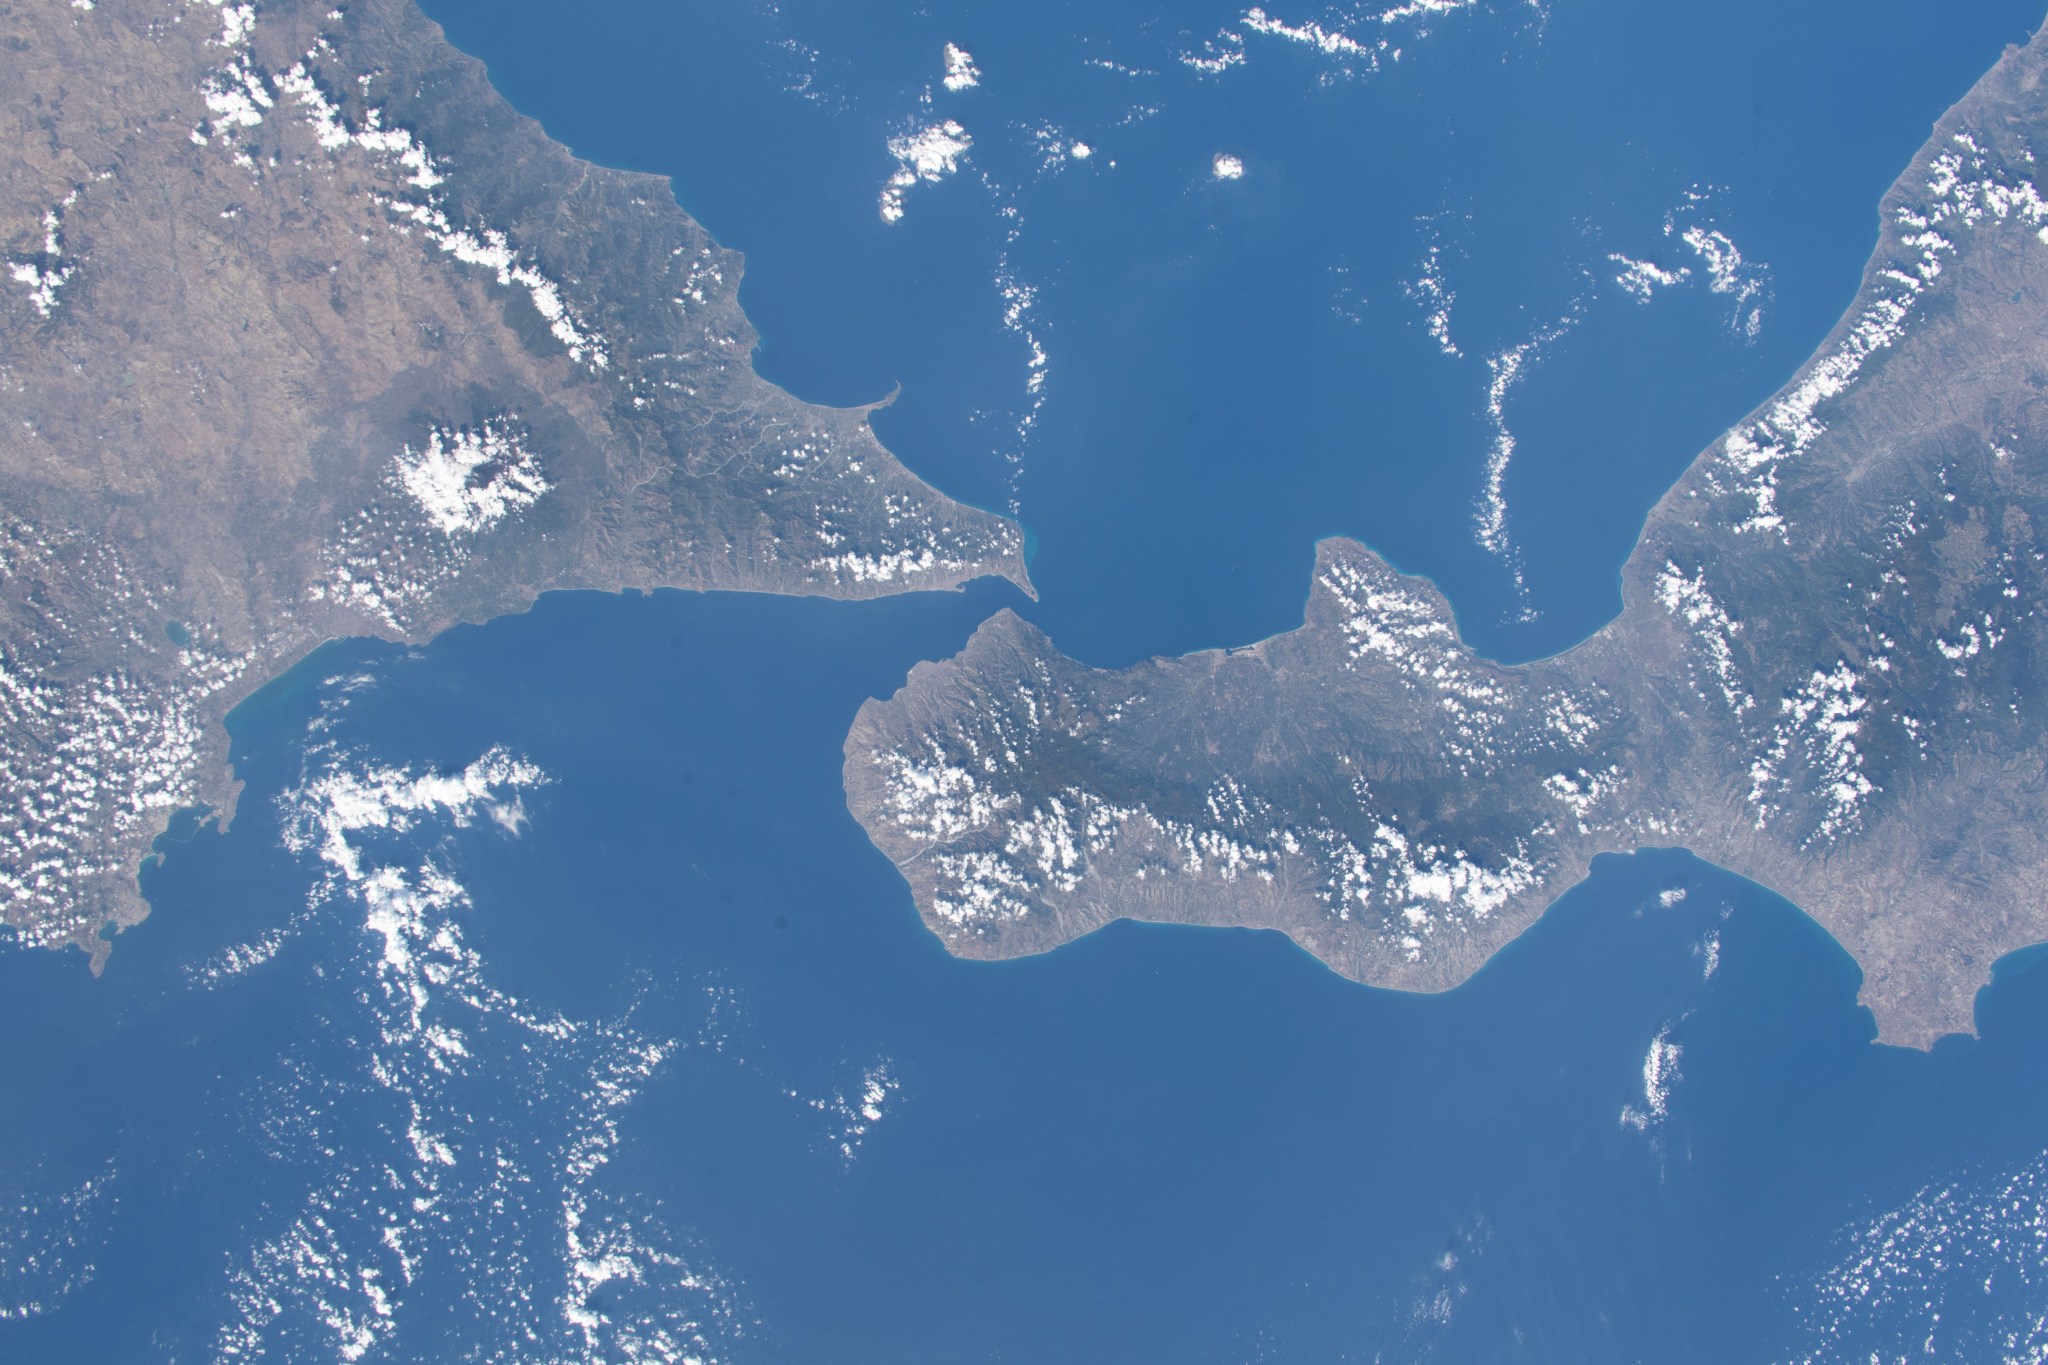 iss070e002586 (Oct. 7, 2023) -- Southern Italy (to the right of the image) meets Sicily (to the left), the largest island in the Mediterranean Sea and one of 20 Italian regions. At its closest point, Sicily resides only 2 miles (~3.2km) from mainland, the two connected by the Strait of Messina. From 260 miles above, the International Space Station offers a unique vantage point of where the two regions meet.